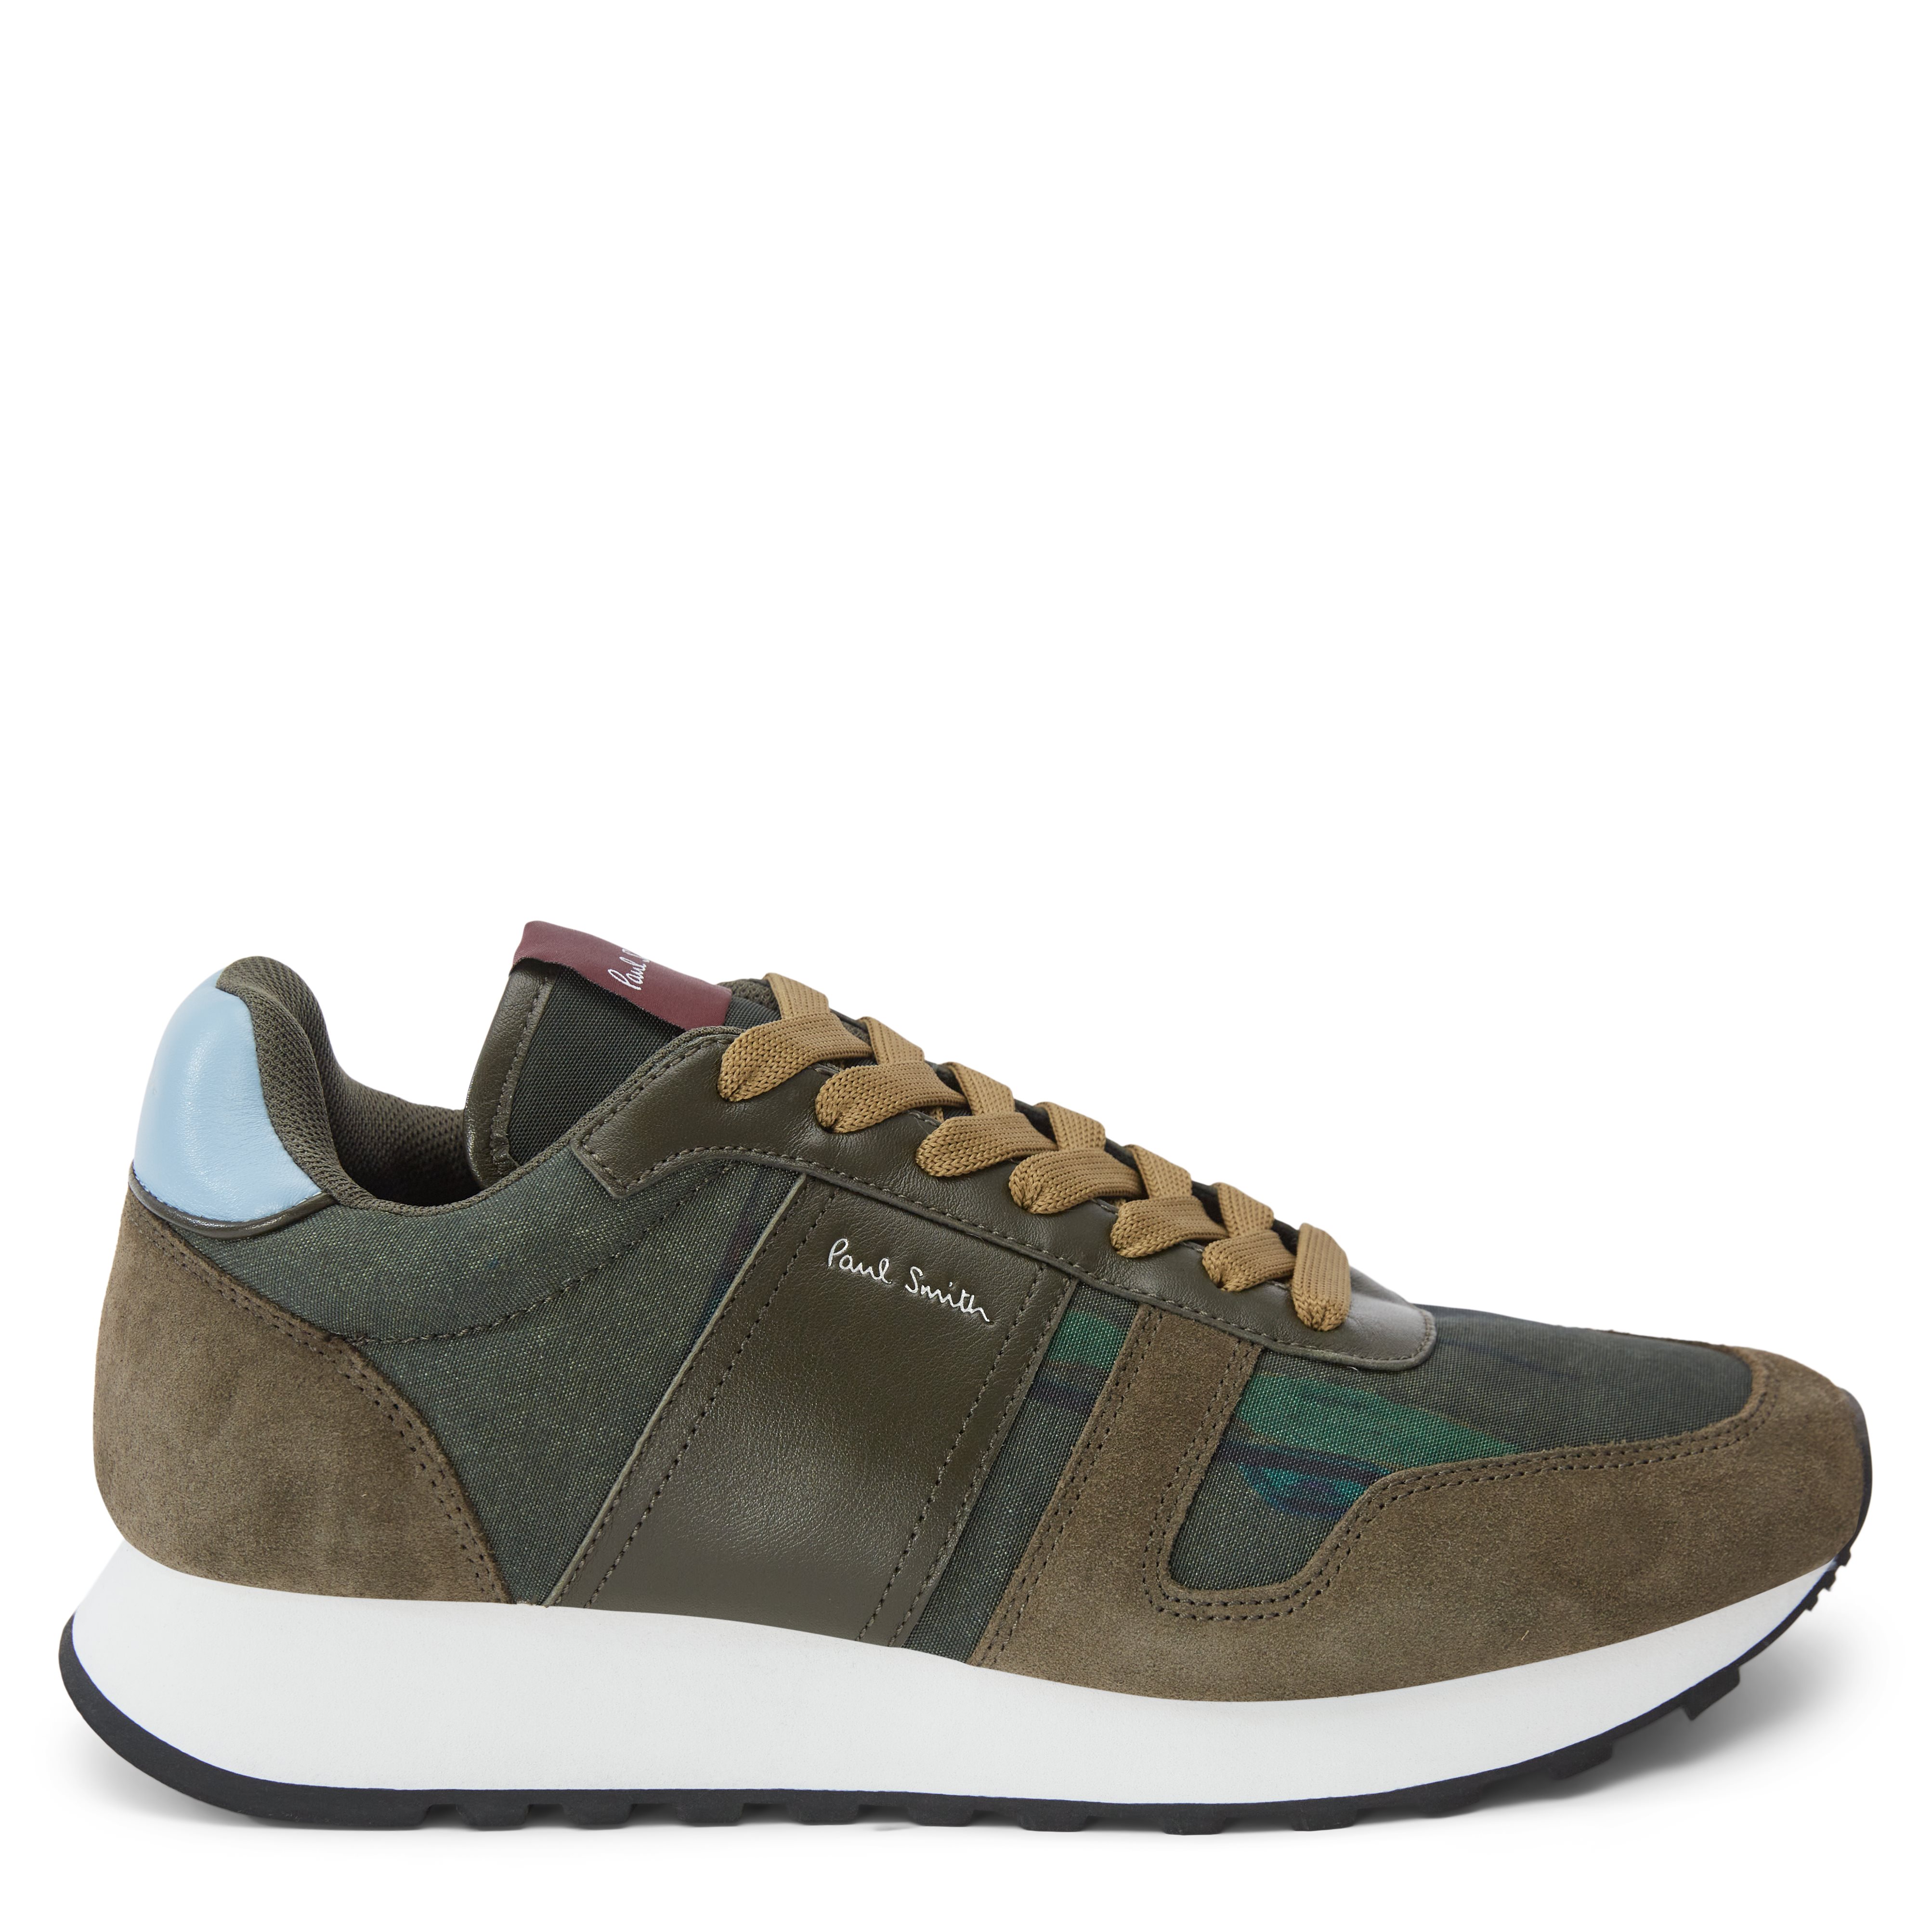 Paul Smith Shoes Shoes M1S EIG08 JSUE RUNNER Army